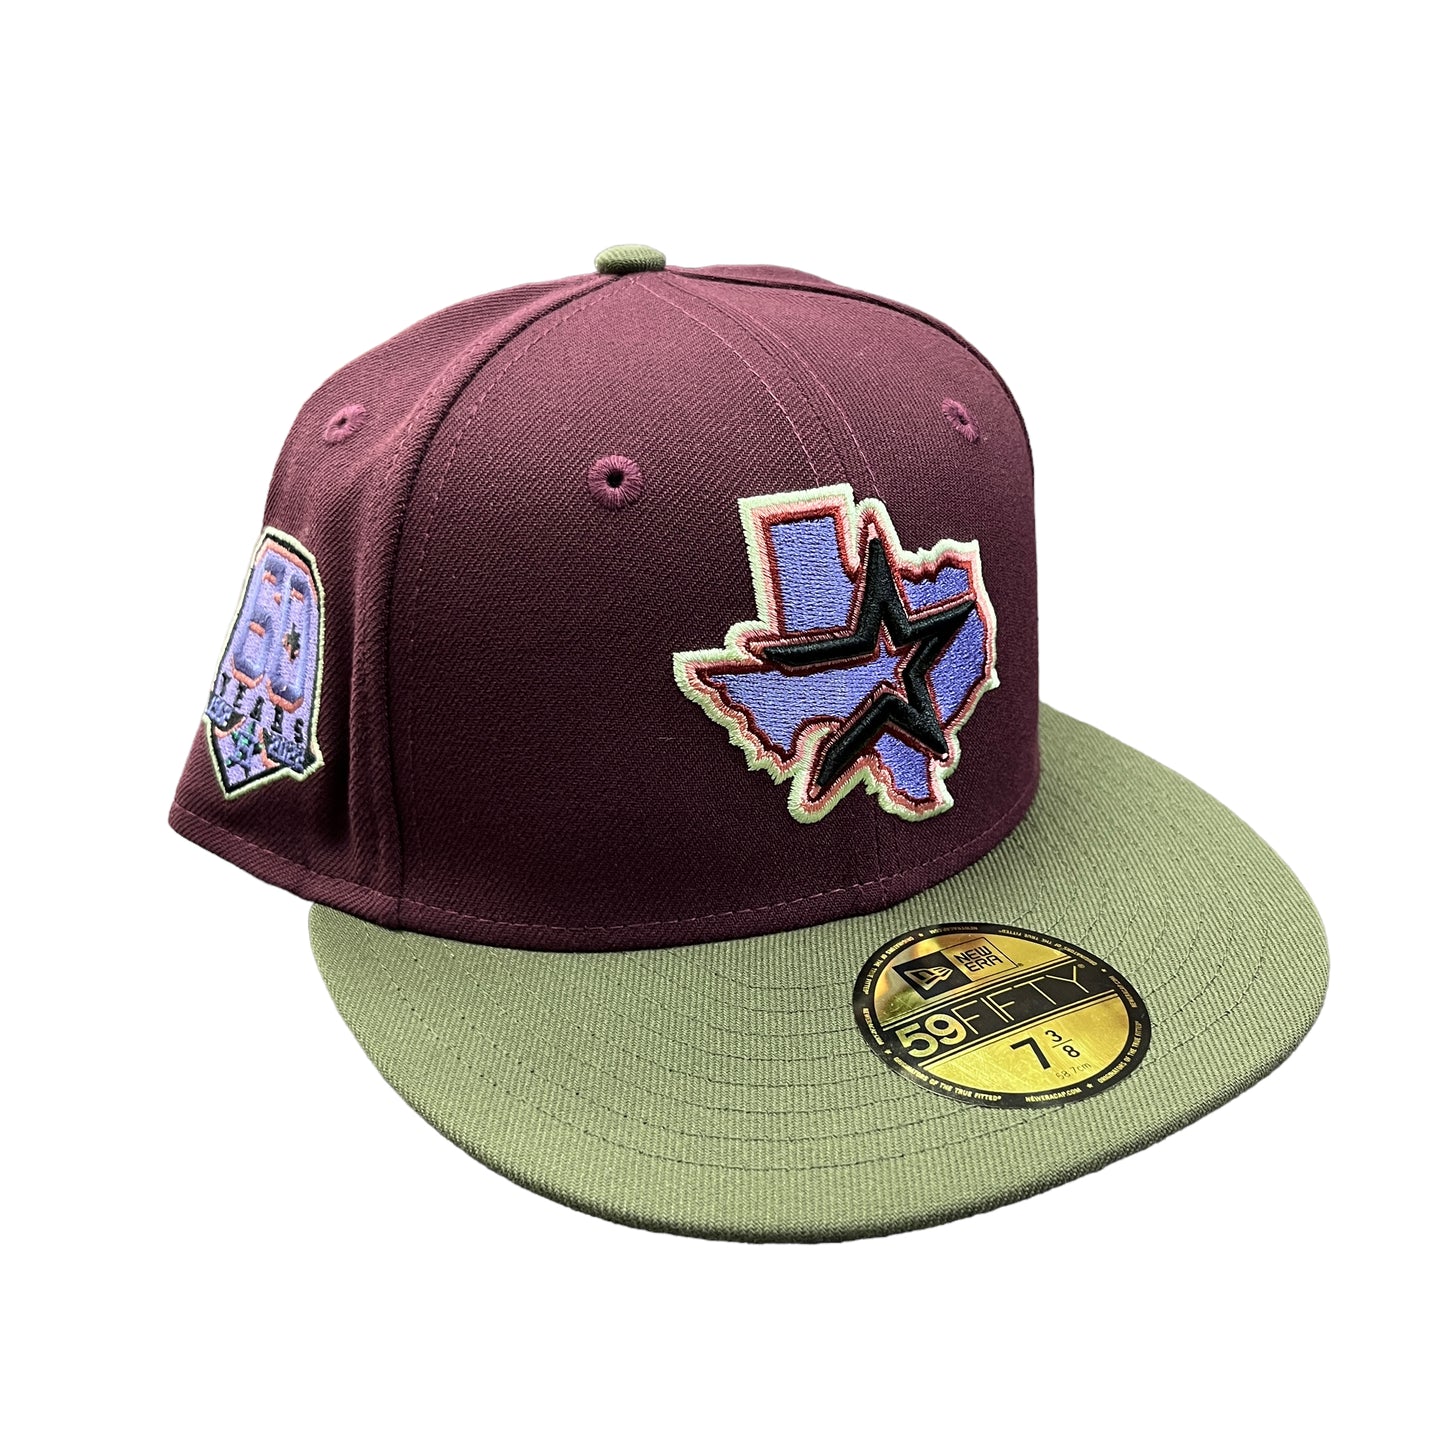 Astros Maroon/Olive Hat